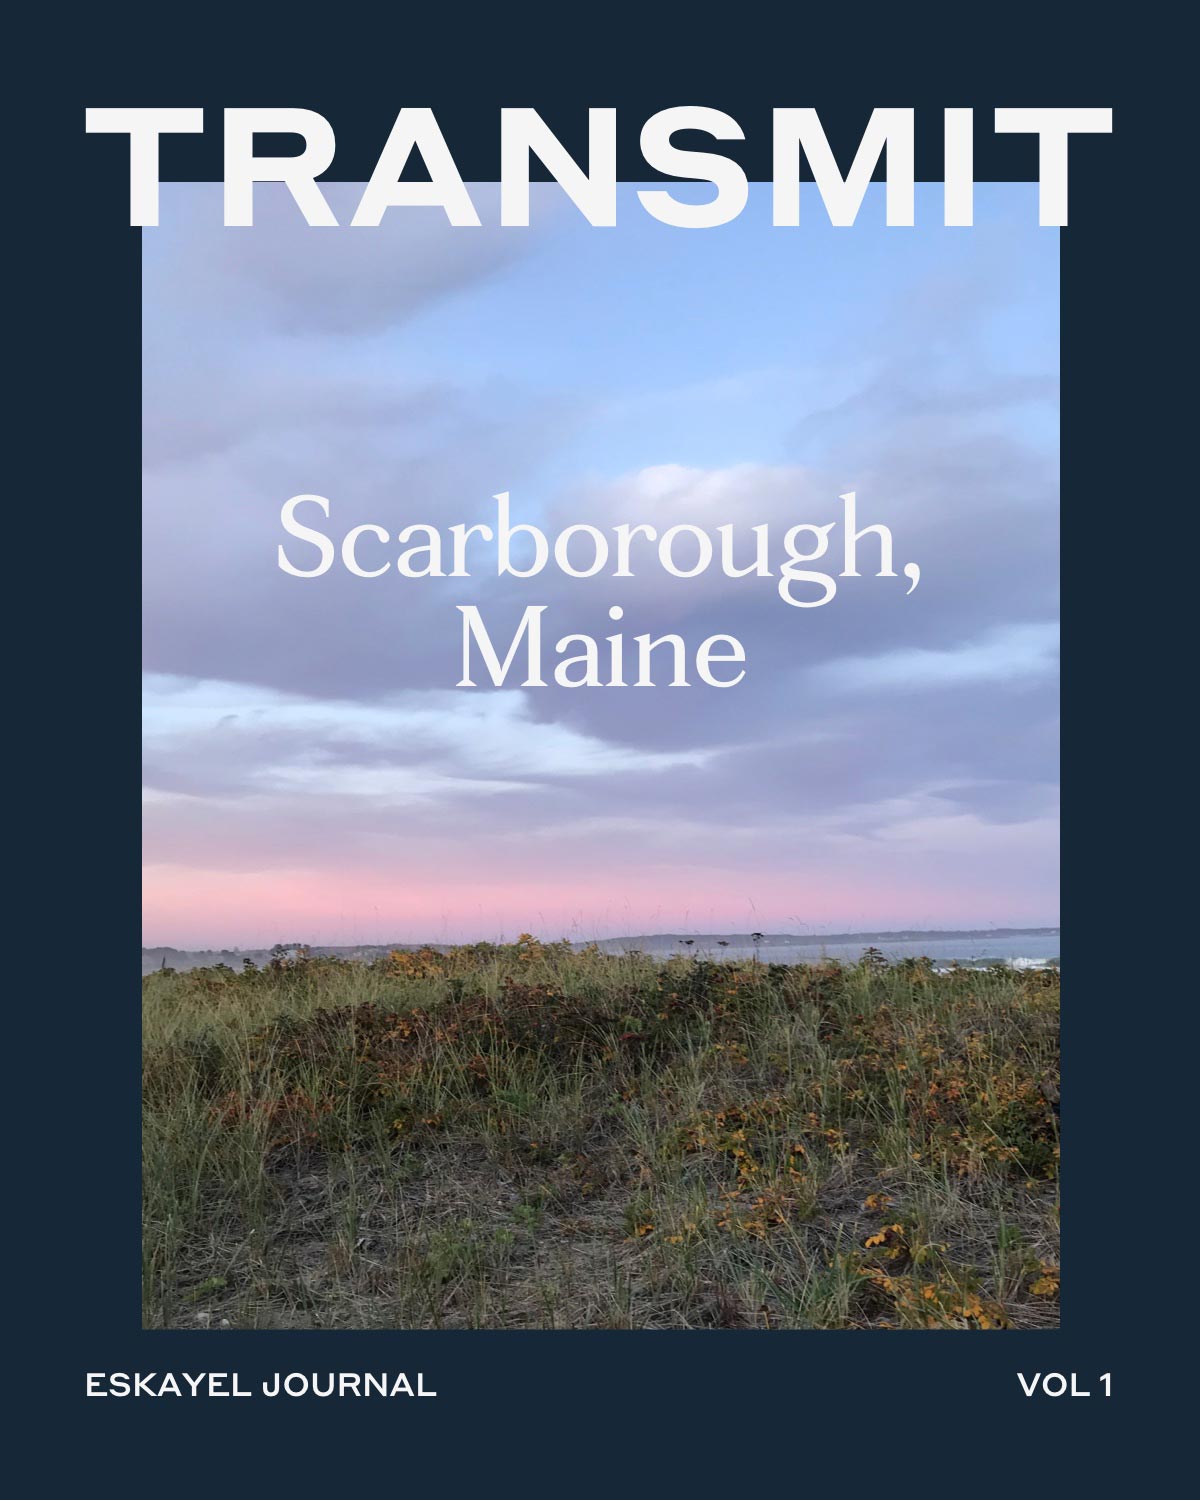 The cover of transmit scarborough, maine